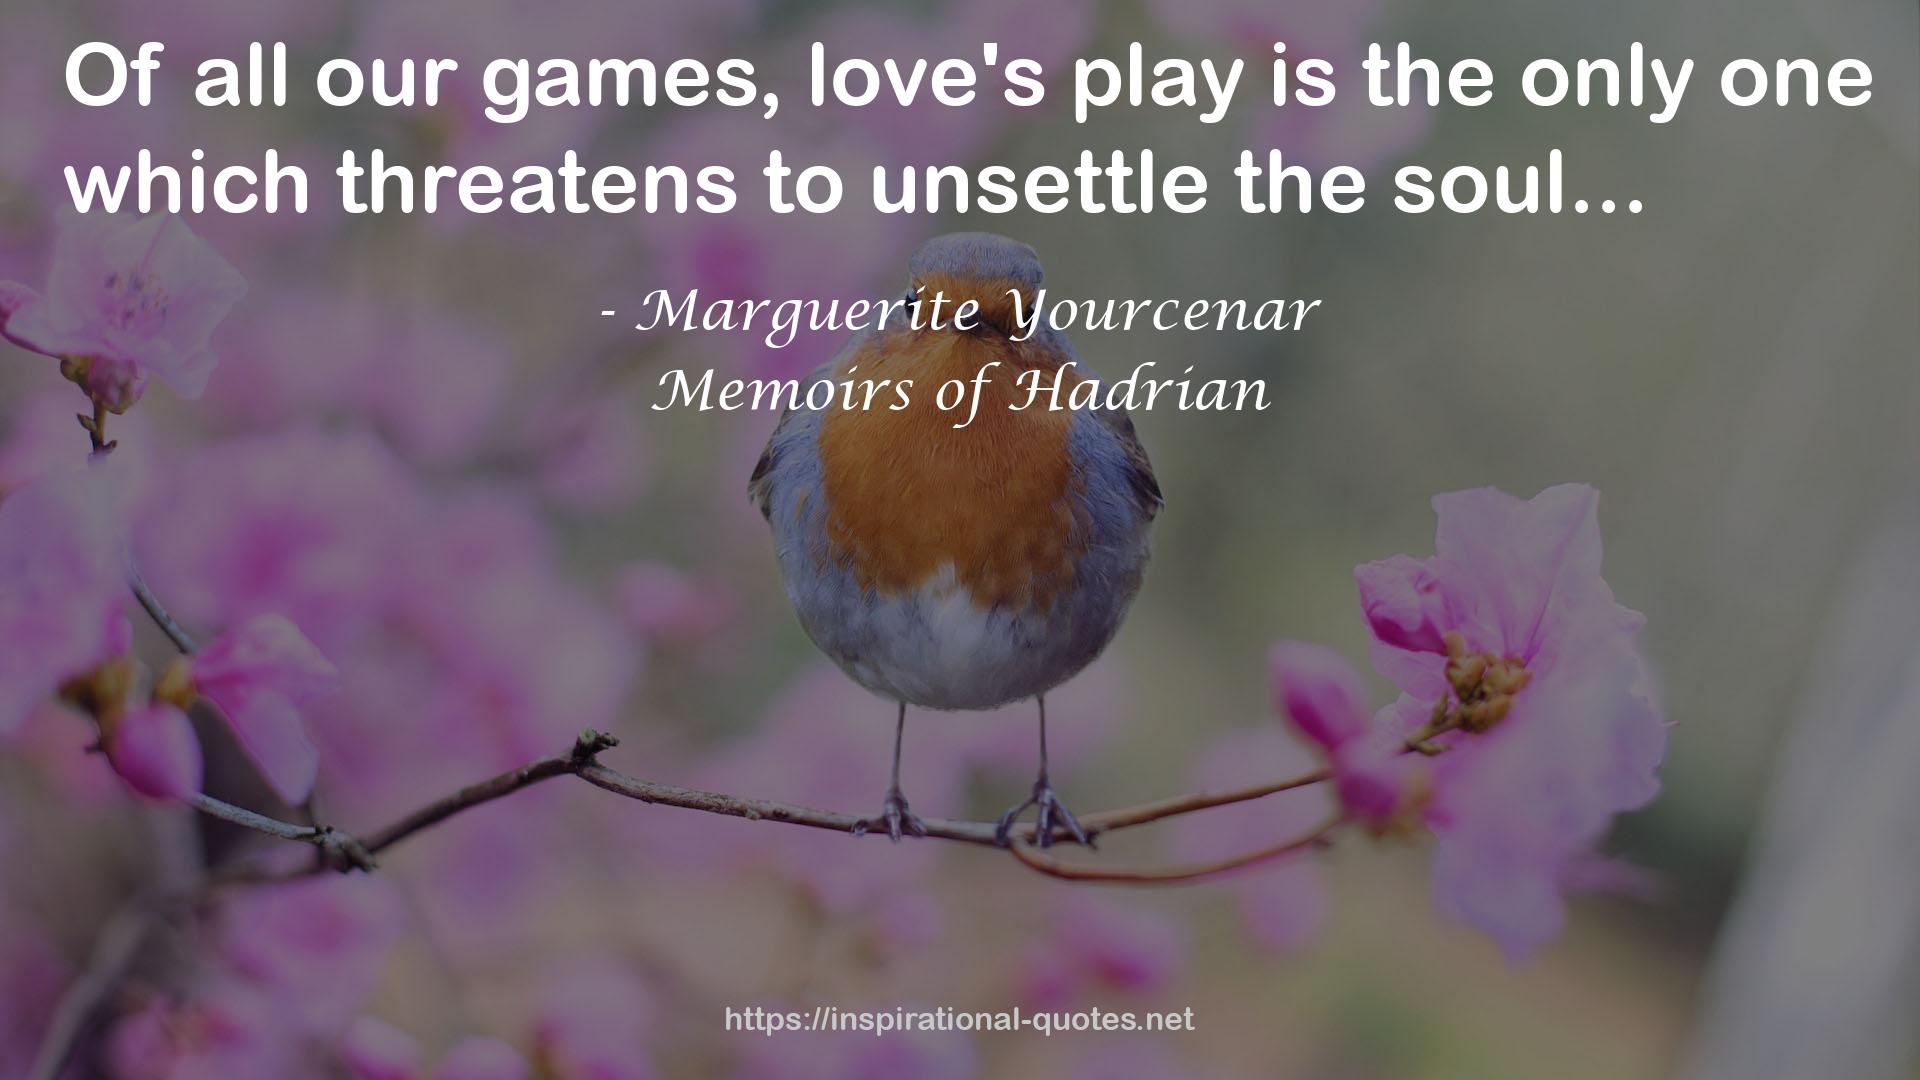 love's play  QUOTES